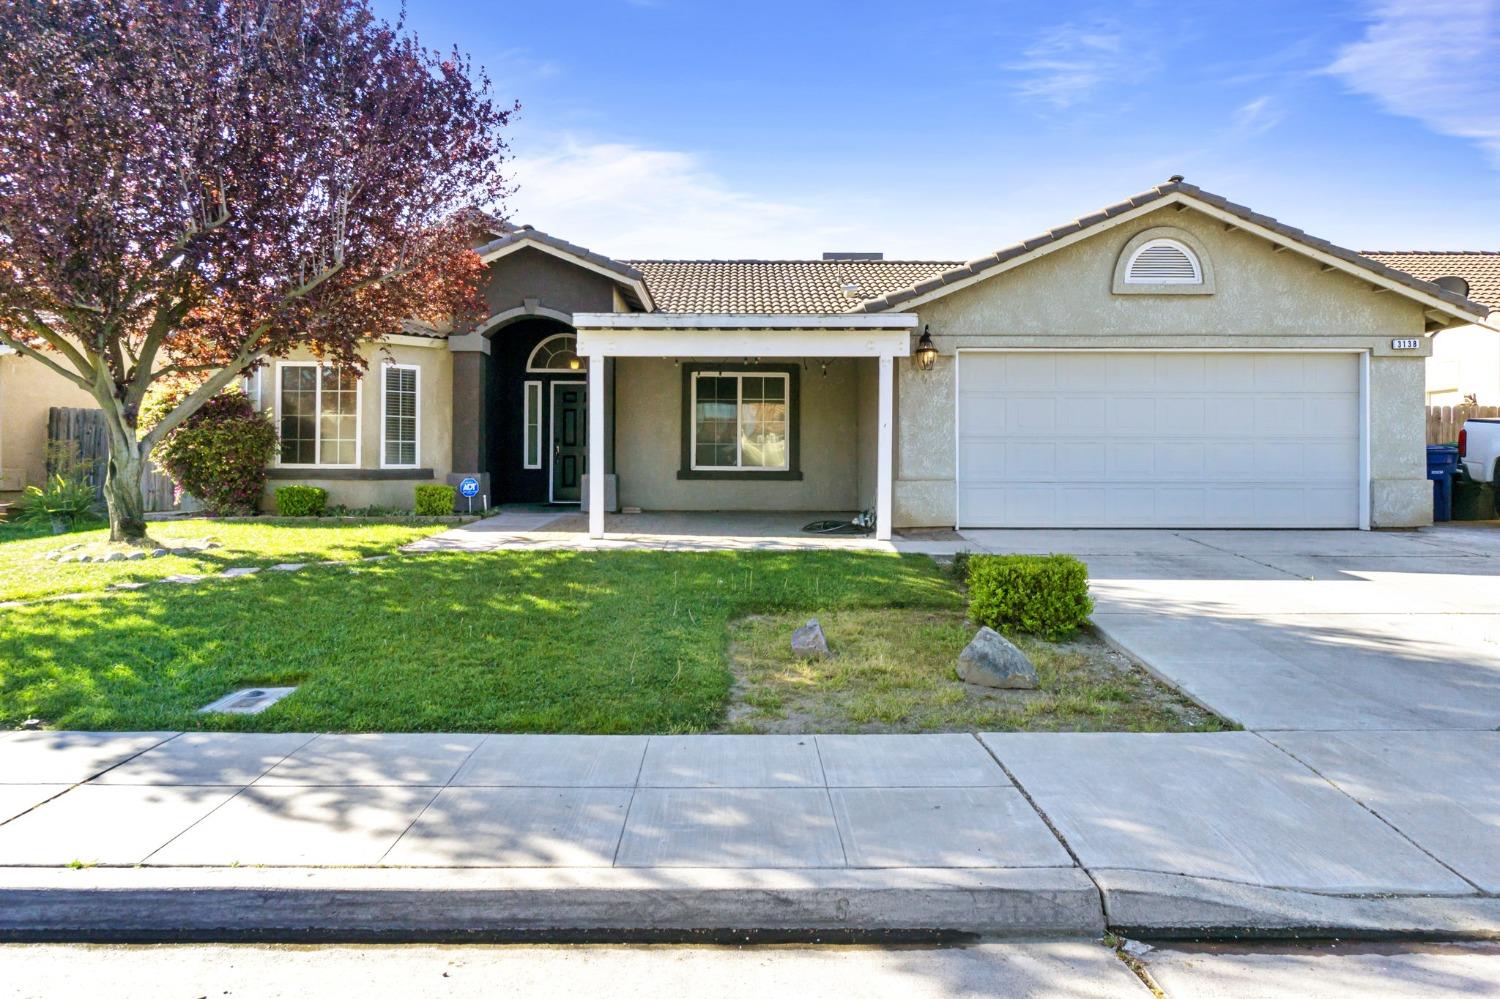 Photo of 3138 Chianti Ave in Madera, CA